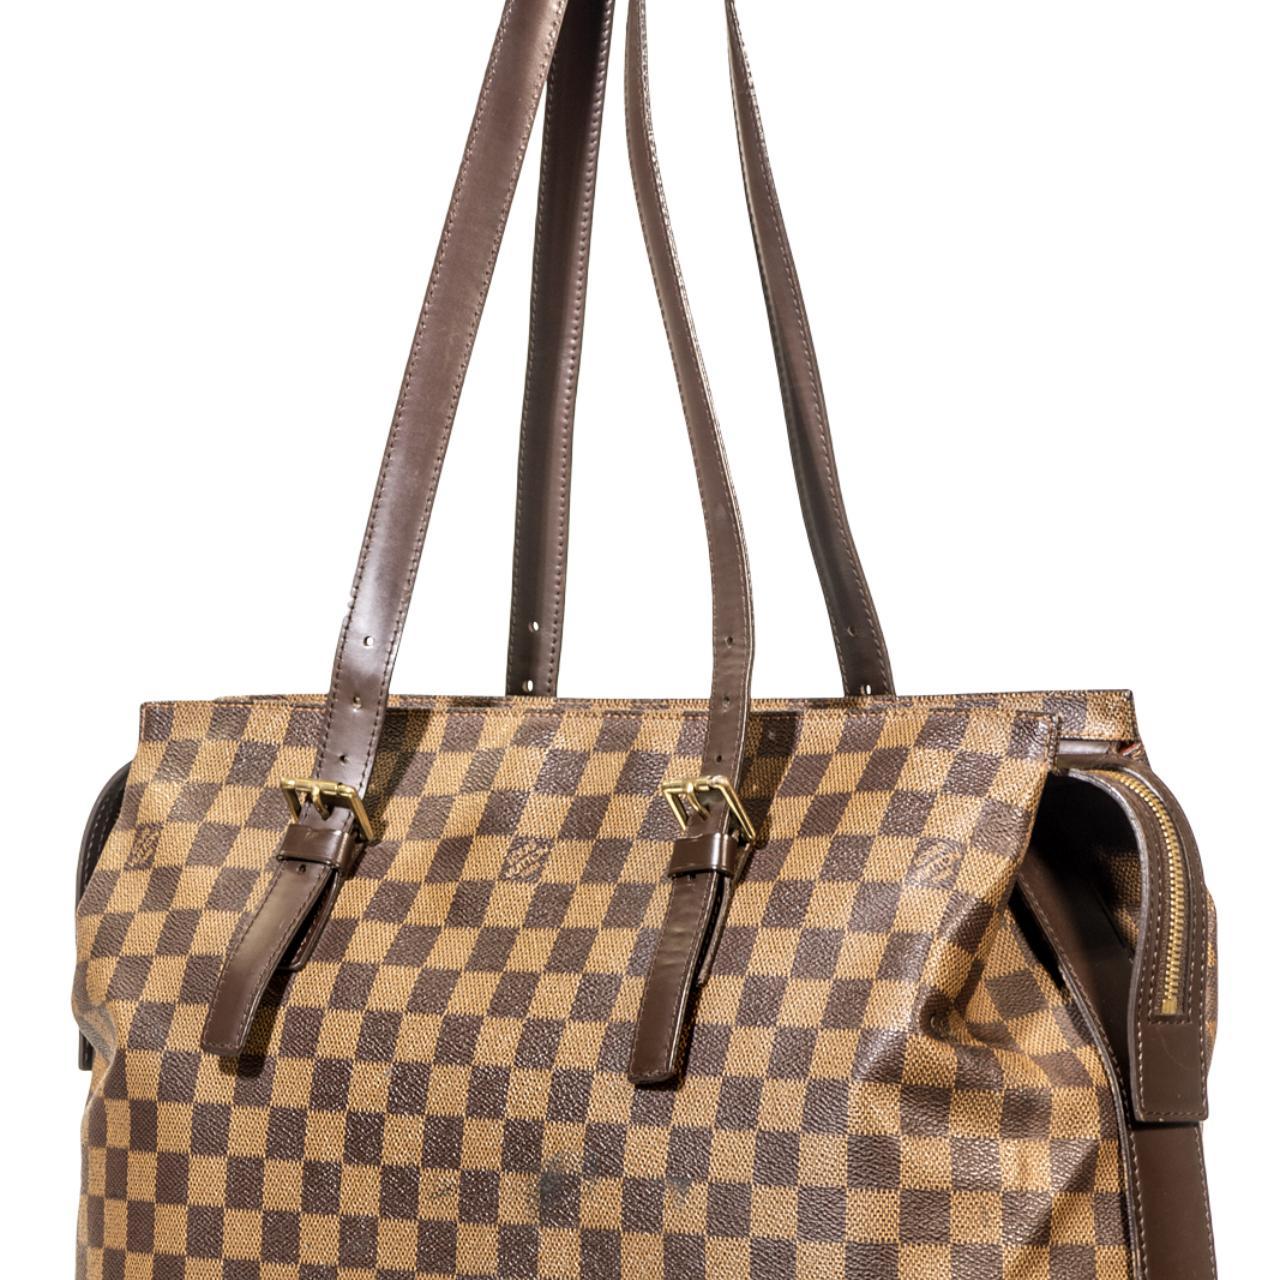 Louis Vuitton Women's Tote Bags & Certificate of Authenticity